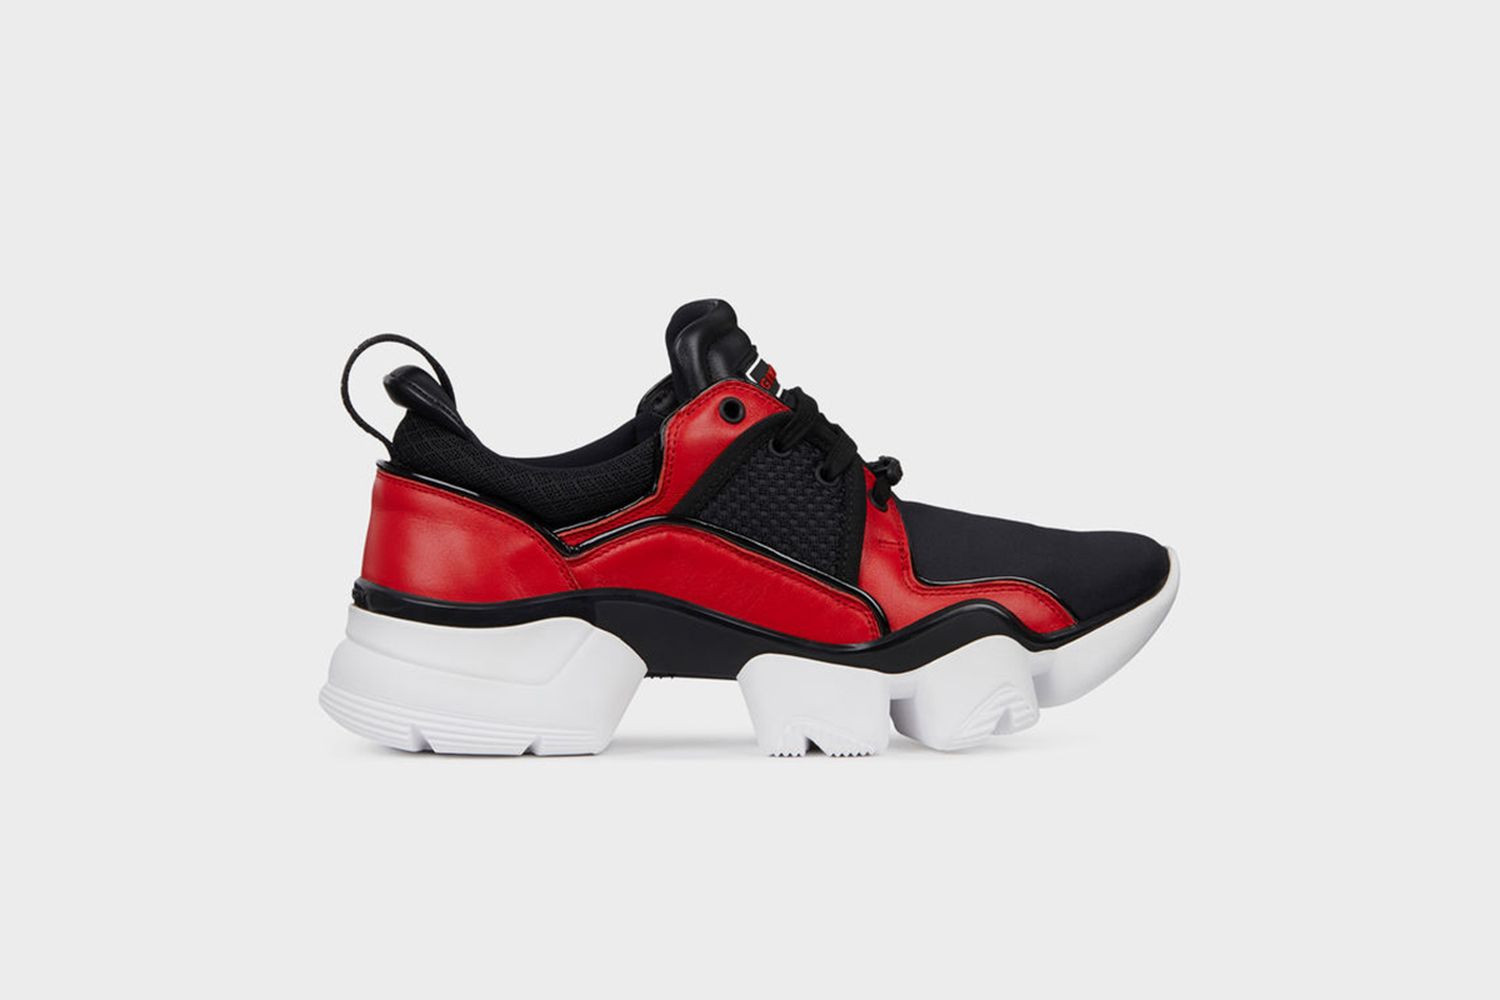 Men's Black and Red JAW Low Sneakers in Neoprene and Leather